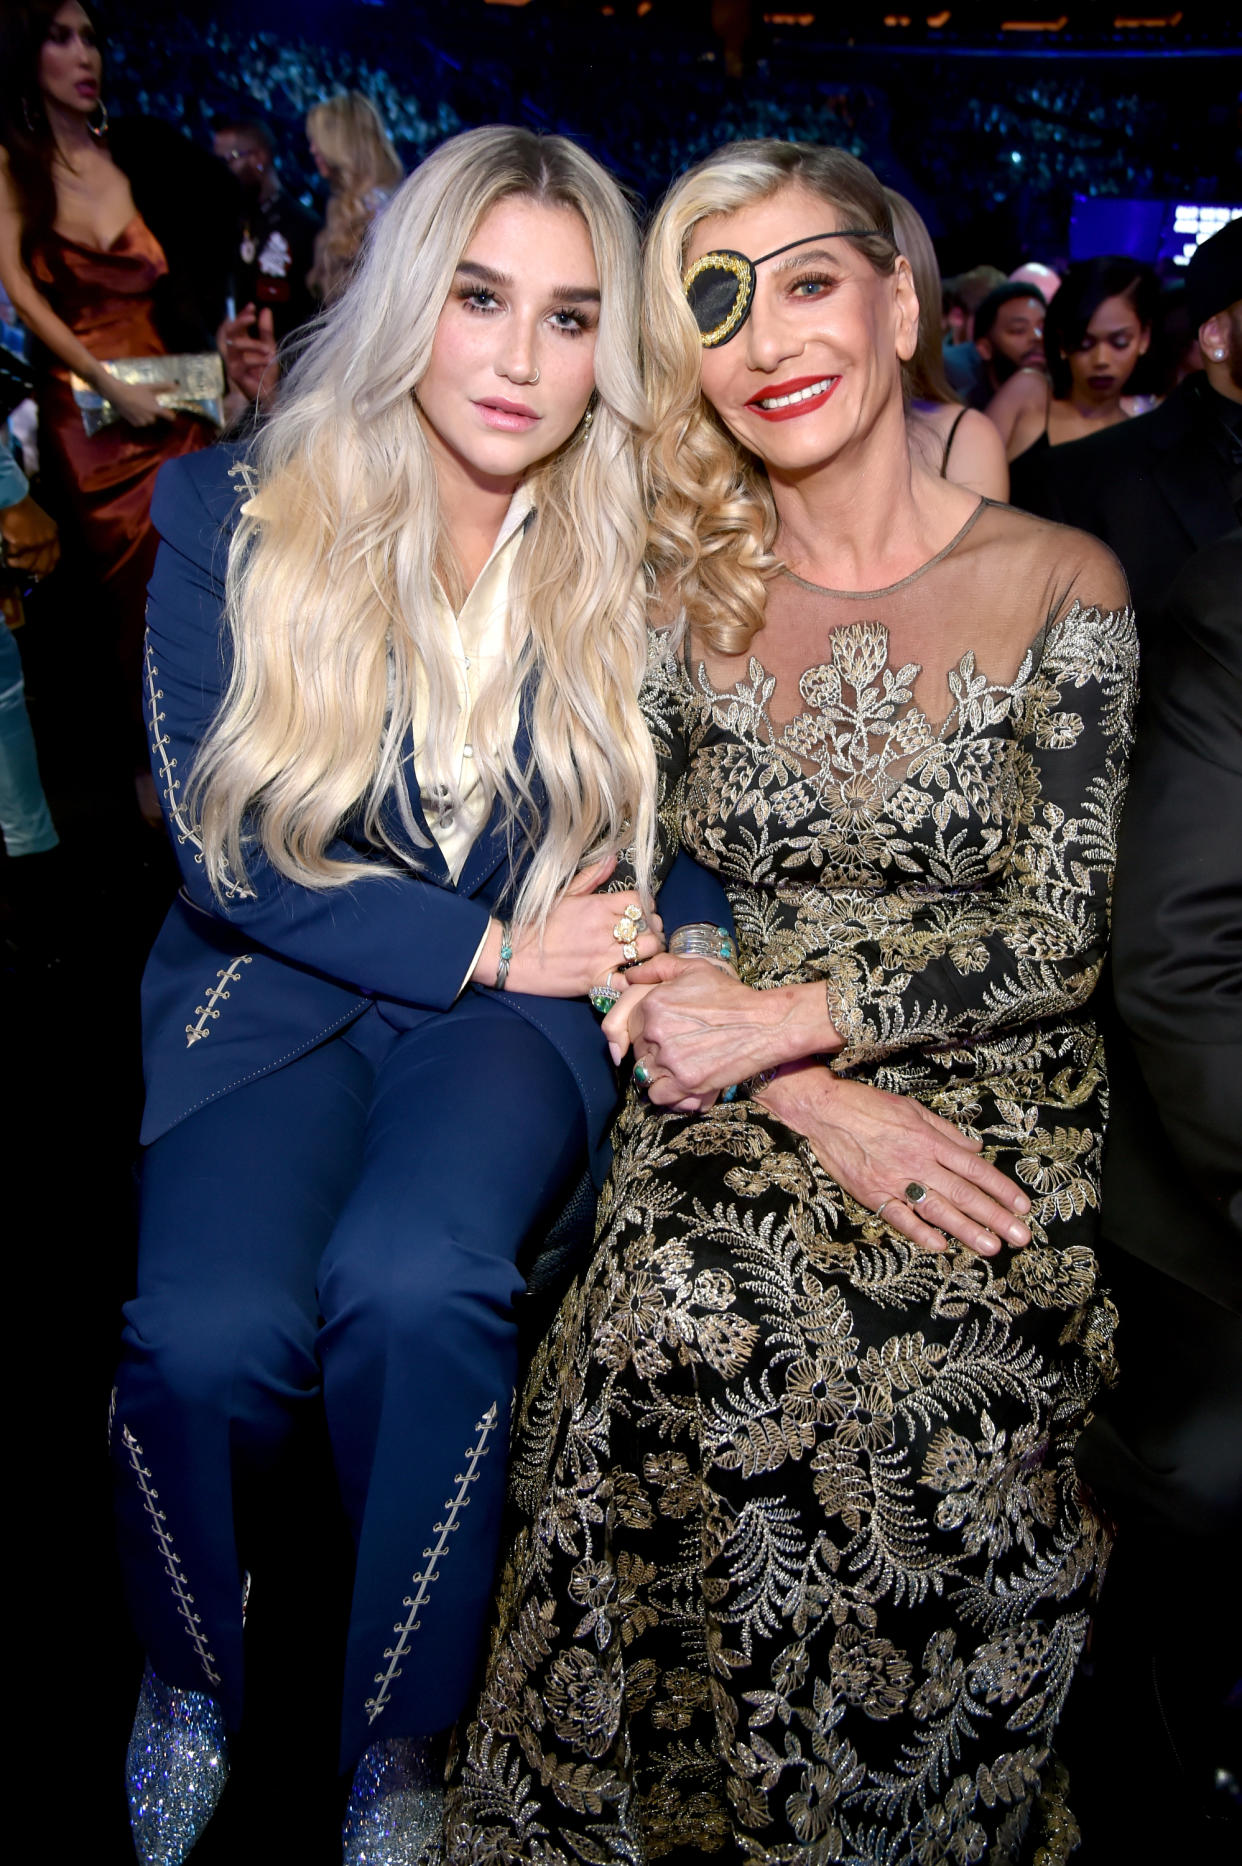 Kesha and mother Pebe Sebert attend the Grammt Awards in2018 in New York City. (Photo: Kevin Mazur/Getty Images for NARAS)